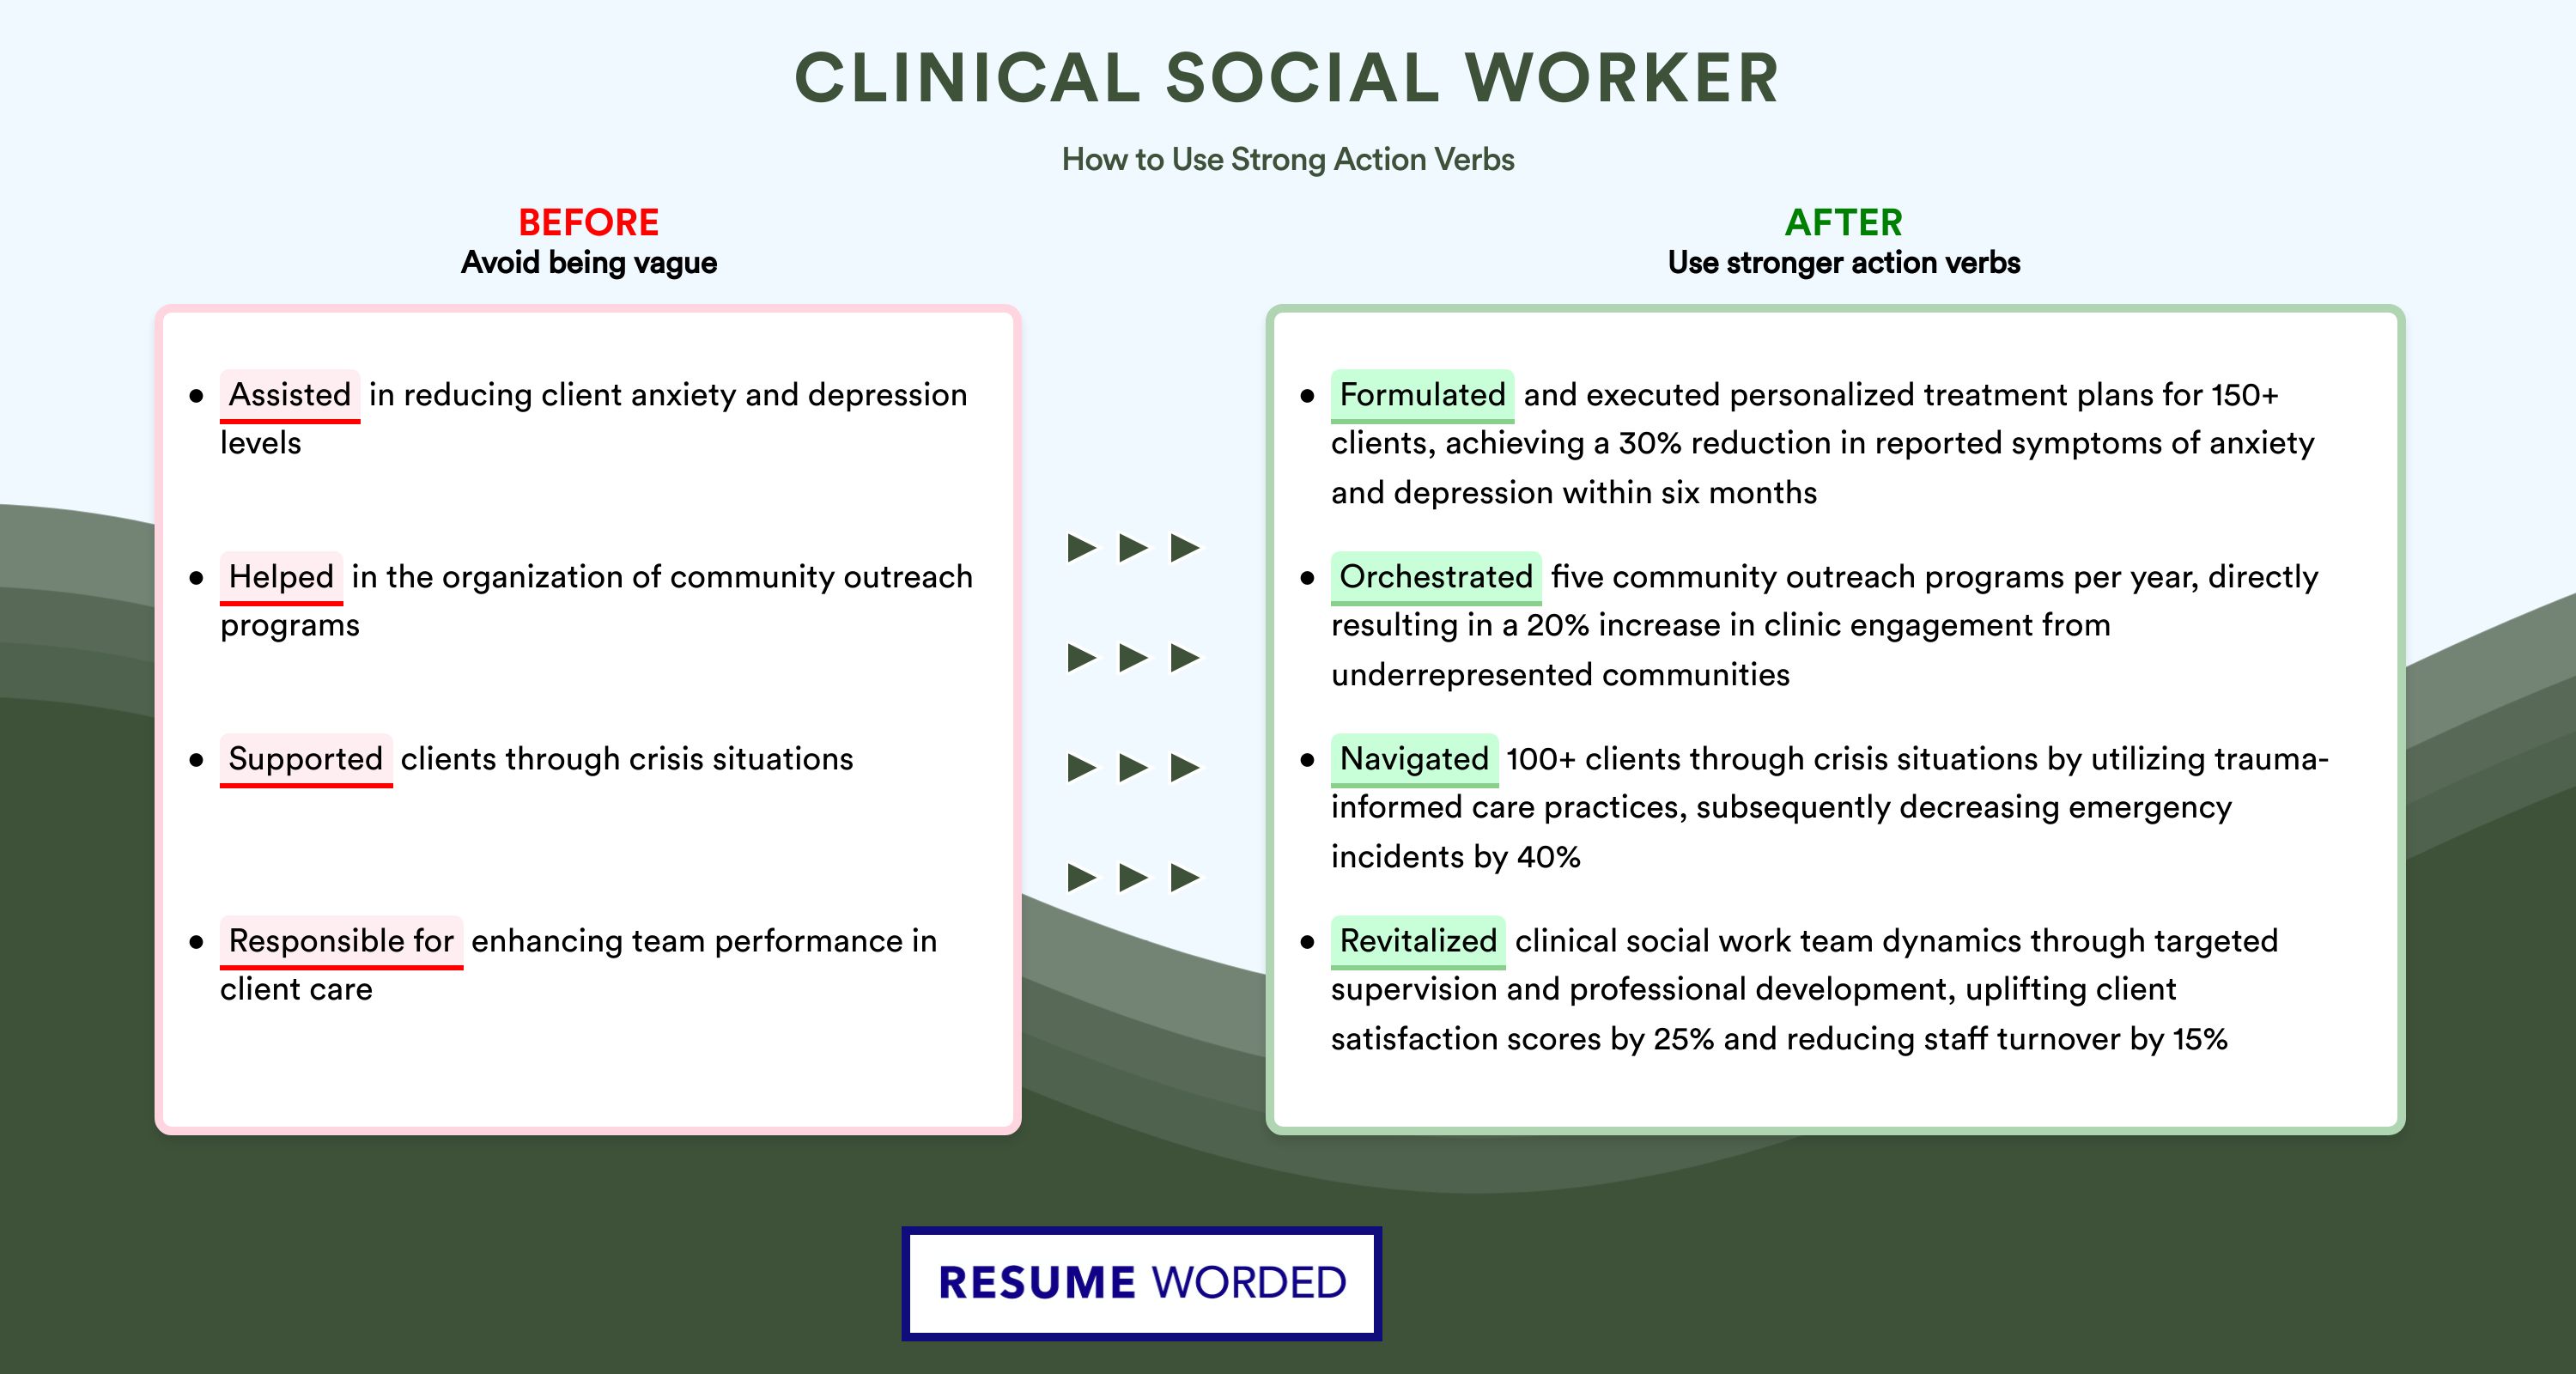 Action Verbs for Clinical Social Worker